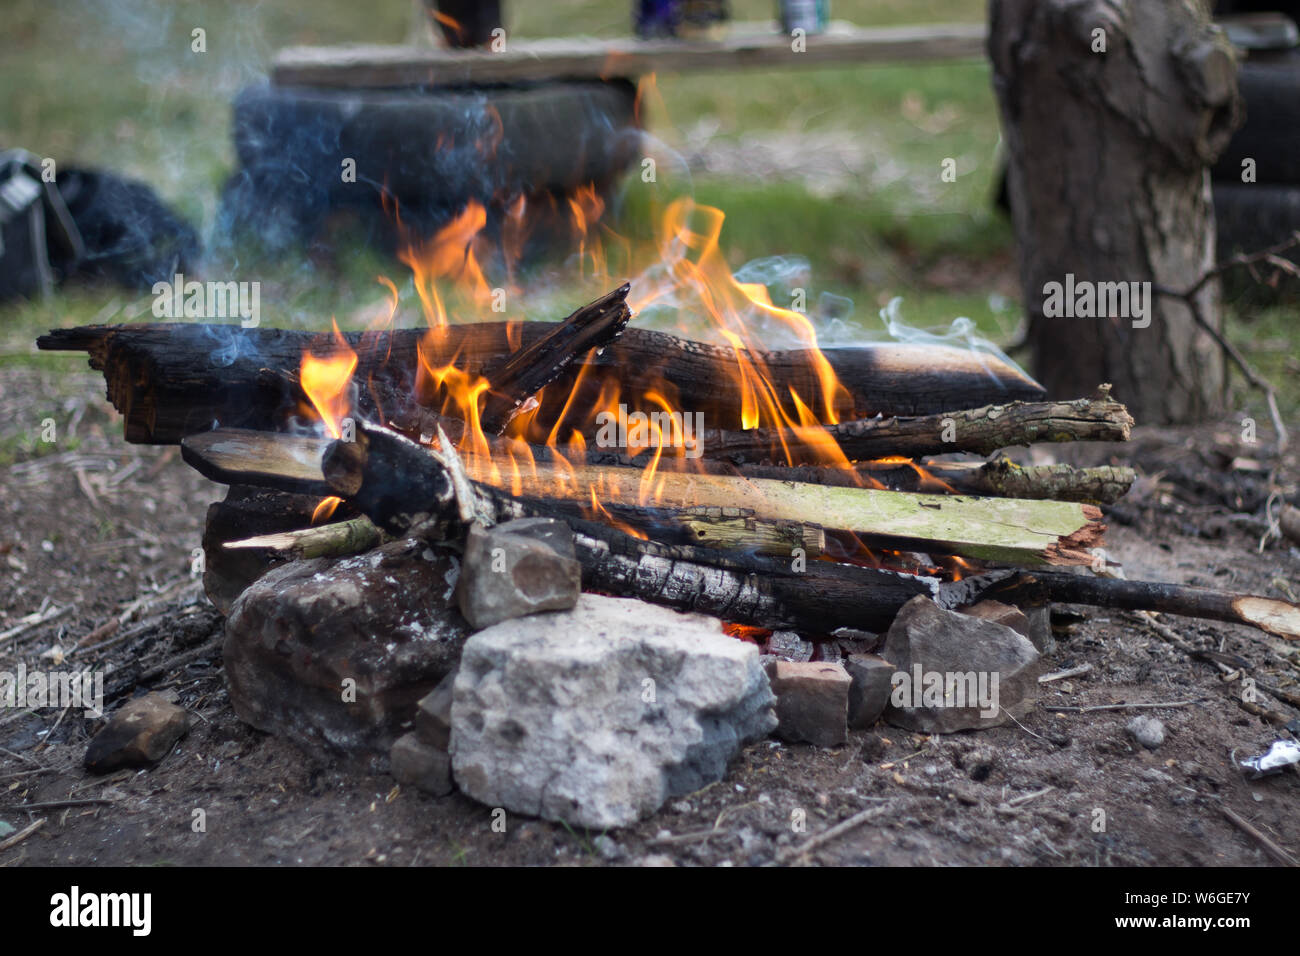 A small campfire made up of twigs and branches with rocks surrounding ...